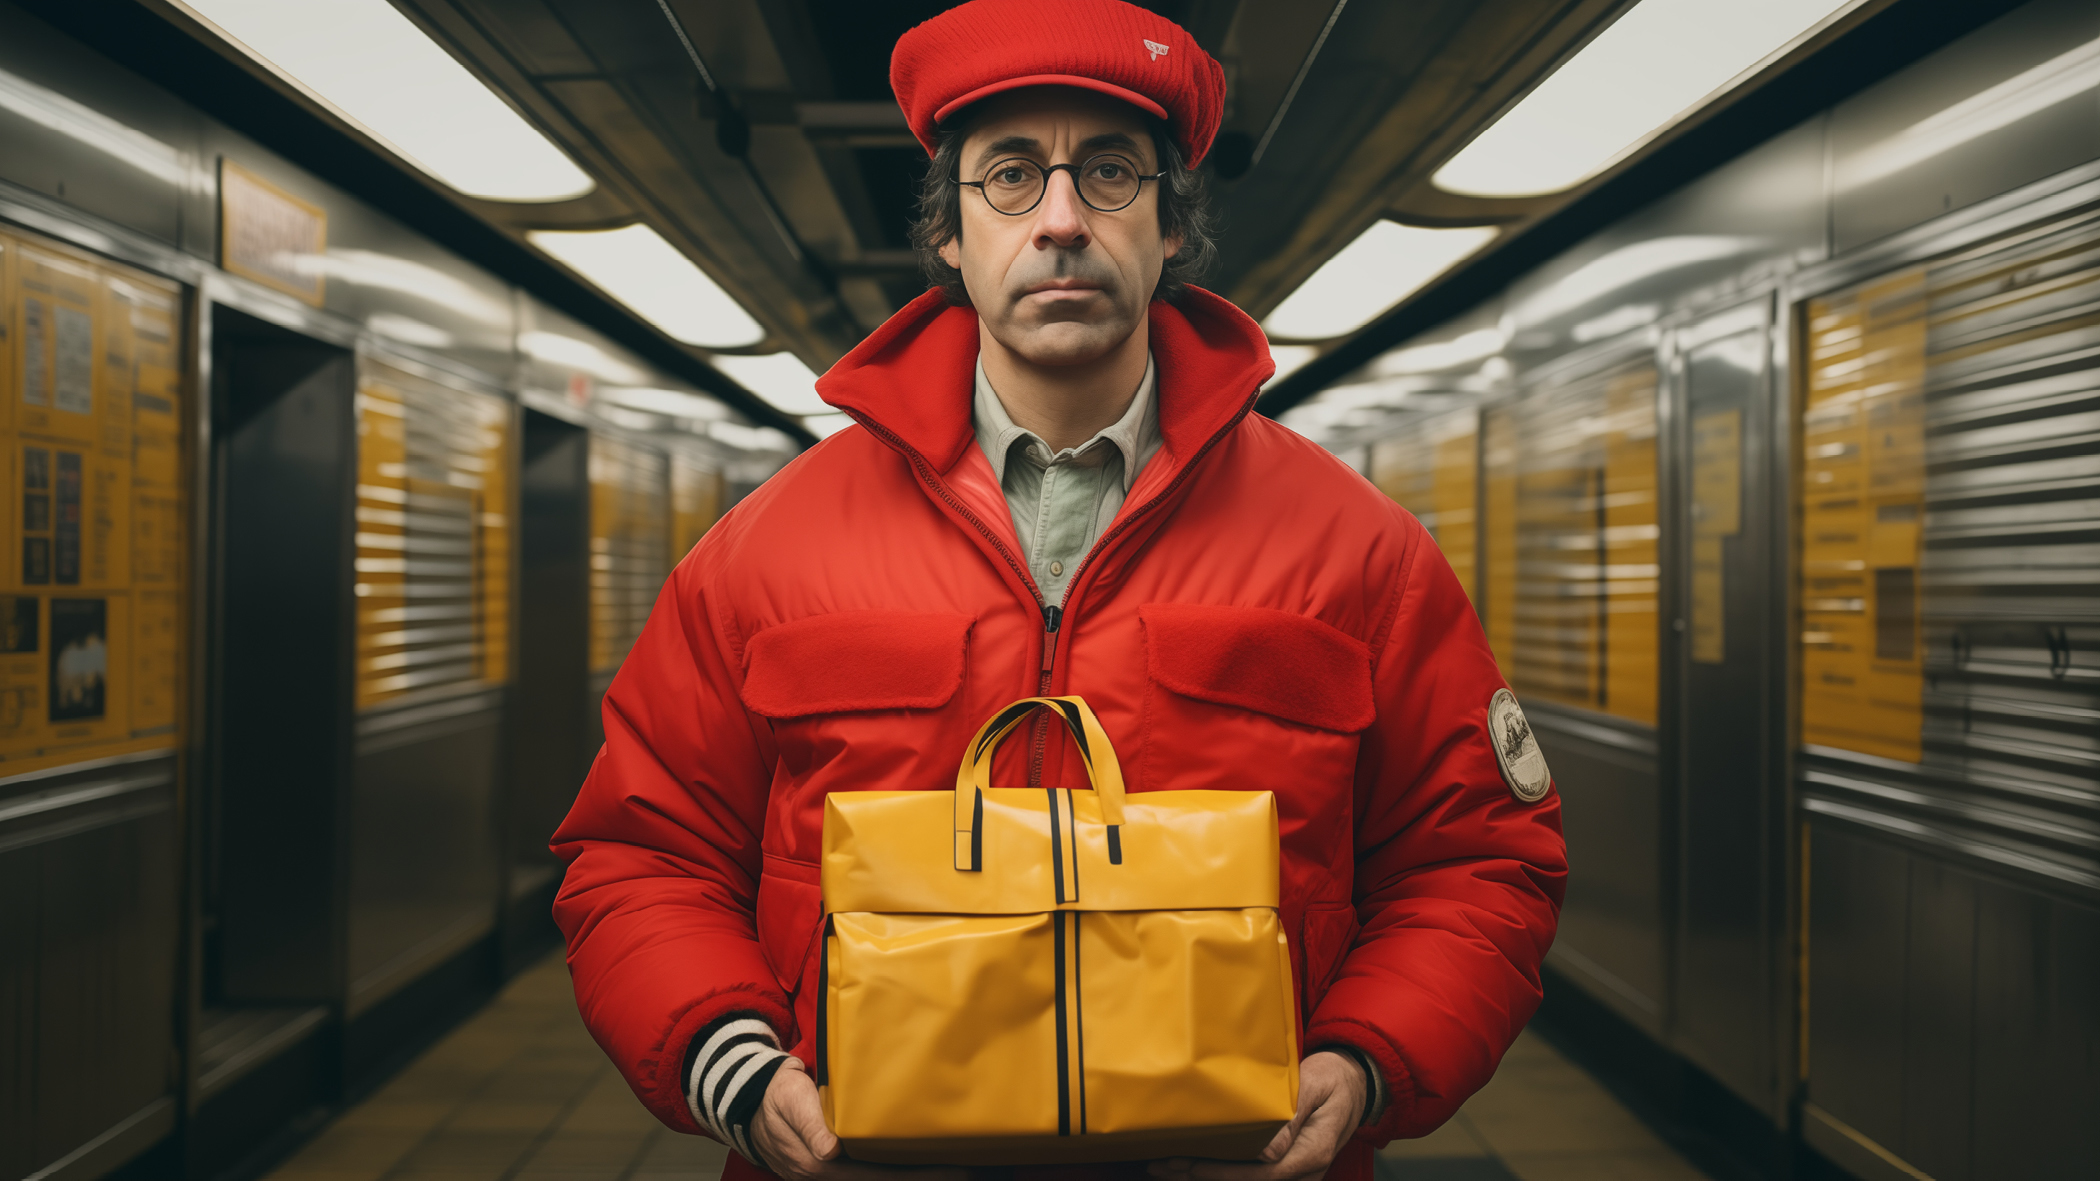 A person in a red jacket and cap stands in a subway station, holding a yellow gift bag, with subway cars blurred in the background.